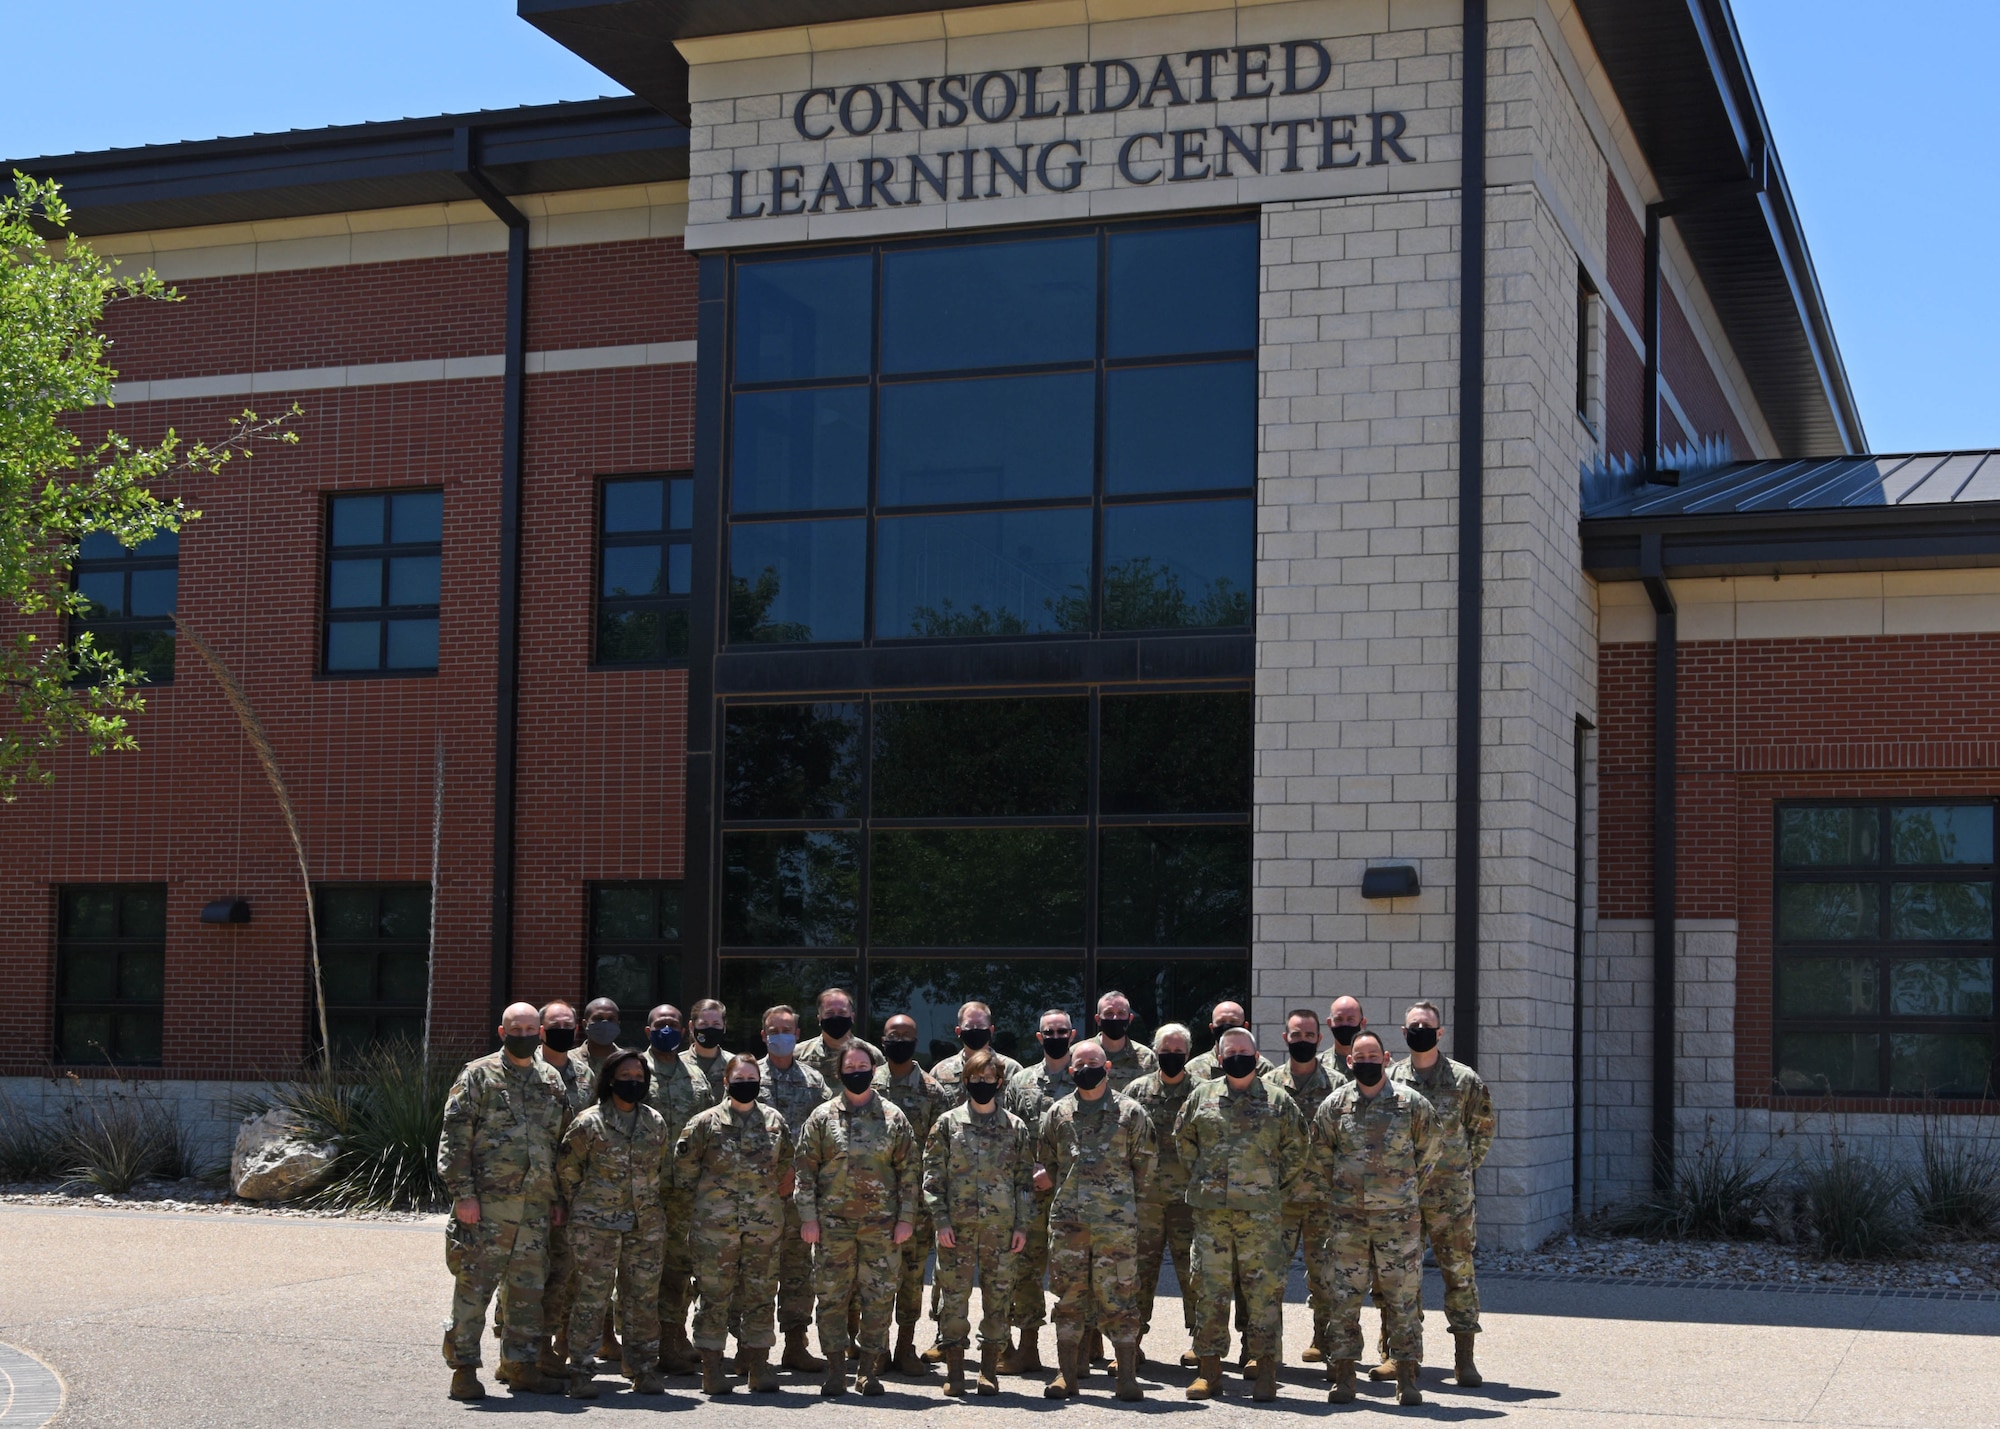 Intelligence leaders from the Intelligence Development Team pose for a photo at the Consolidated Learning Center on Goodfellow Air Force Base, Texas, April 21, 2021. The Intelligence DT is a group of senior officers tasked to assign intelligence officers to their positions. (U.S. Air Force photo by Senior Airman Ethan Sherwood)